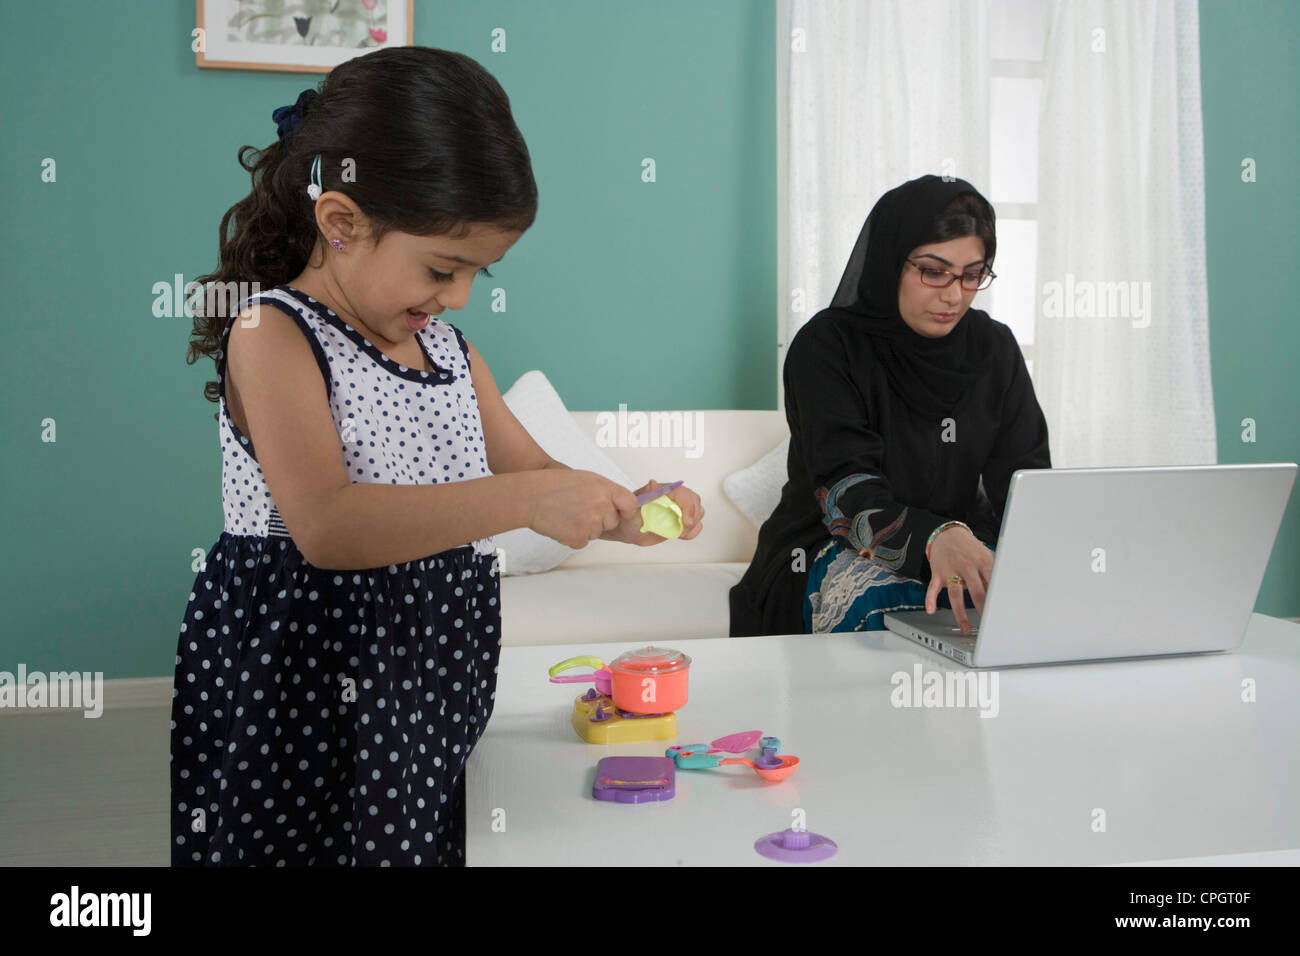 Arab mother working at home, daughter playing Stock Photo